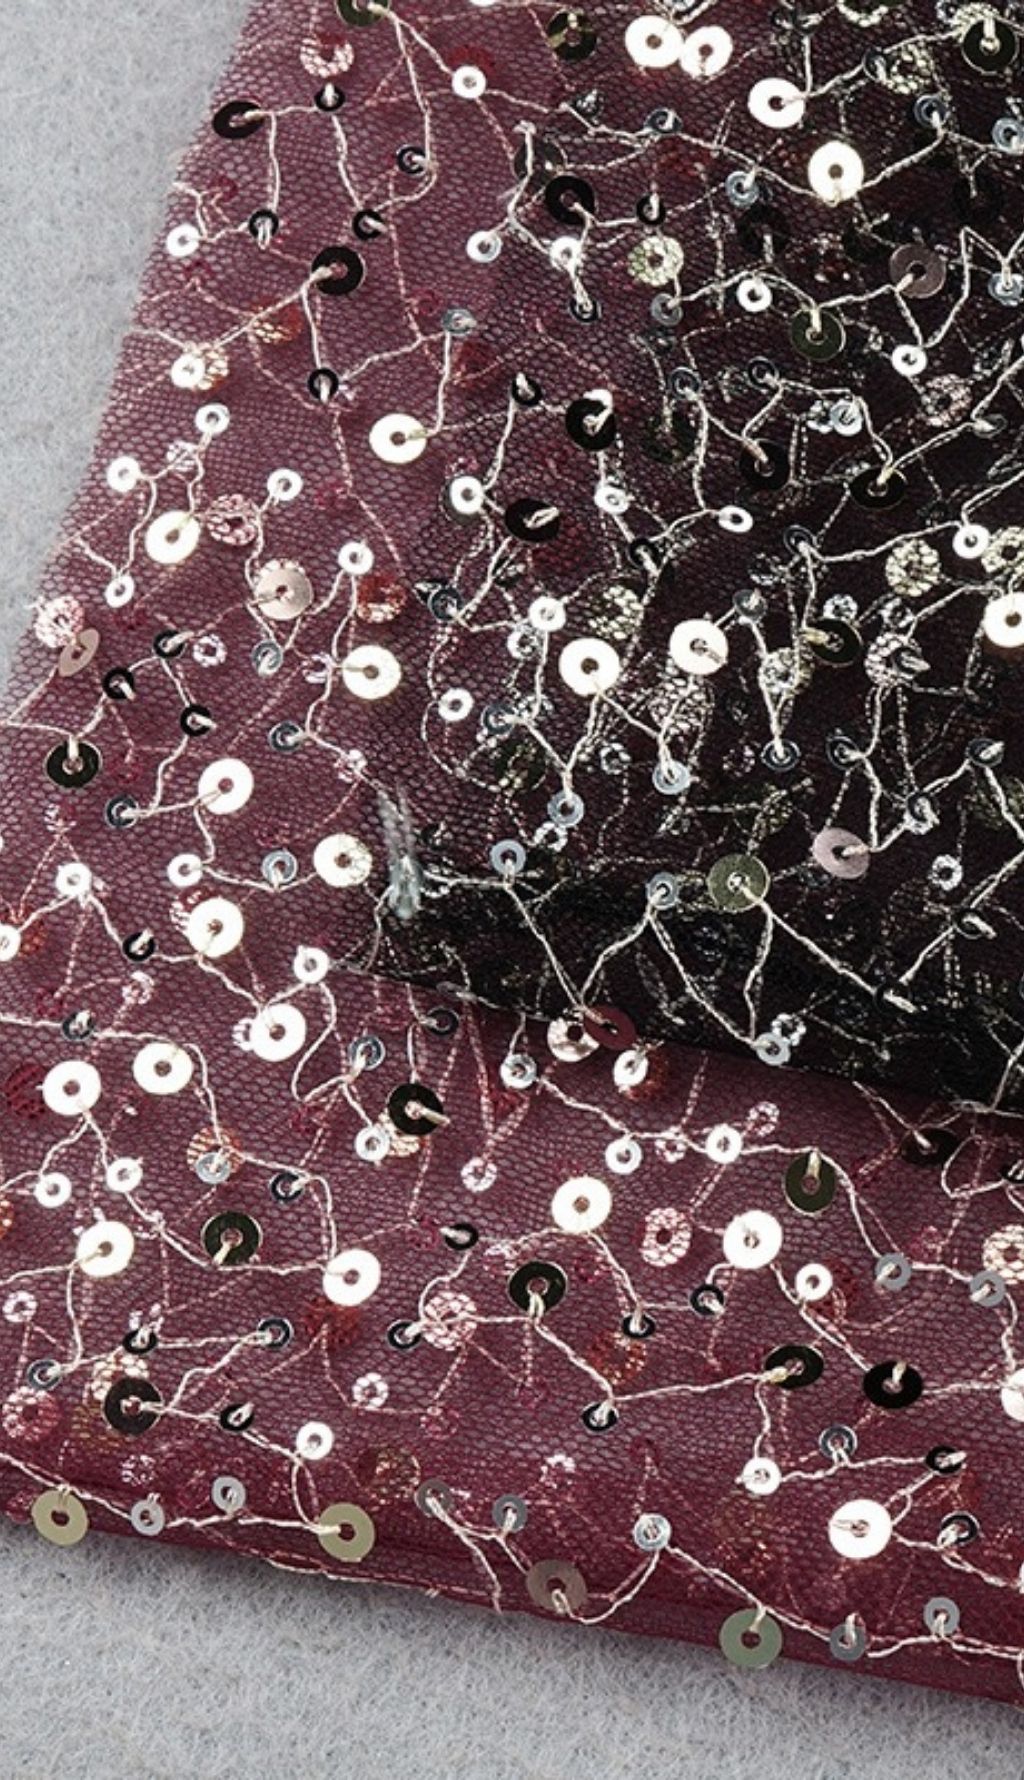 Chaotic bead floral dress